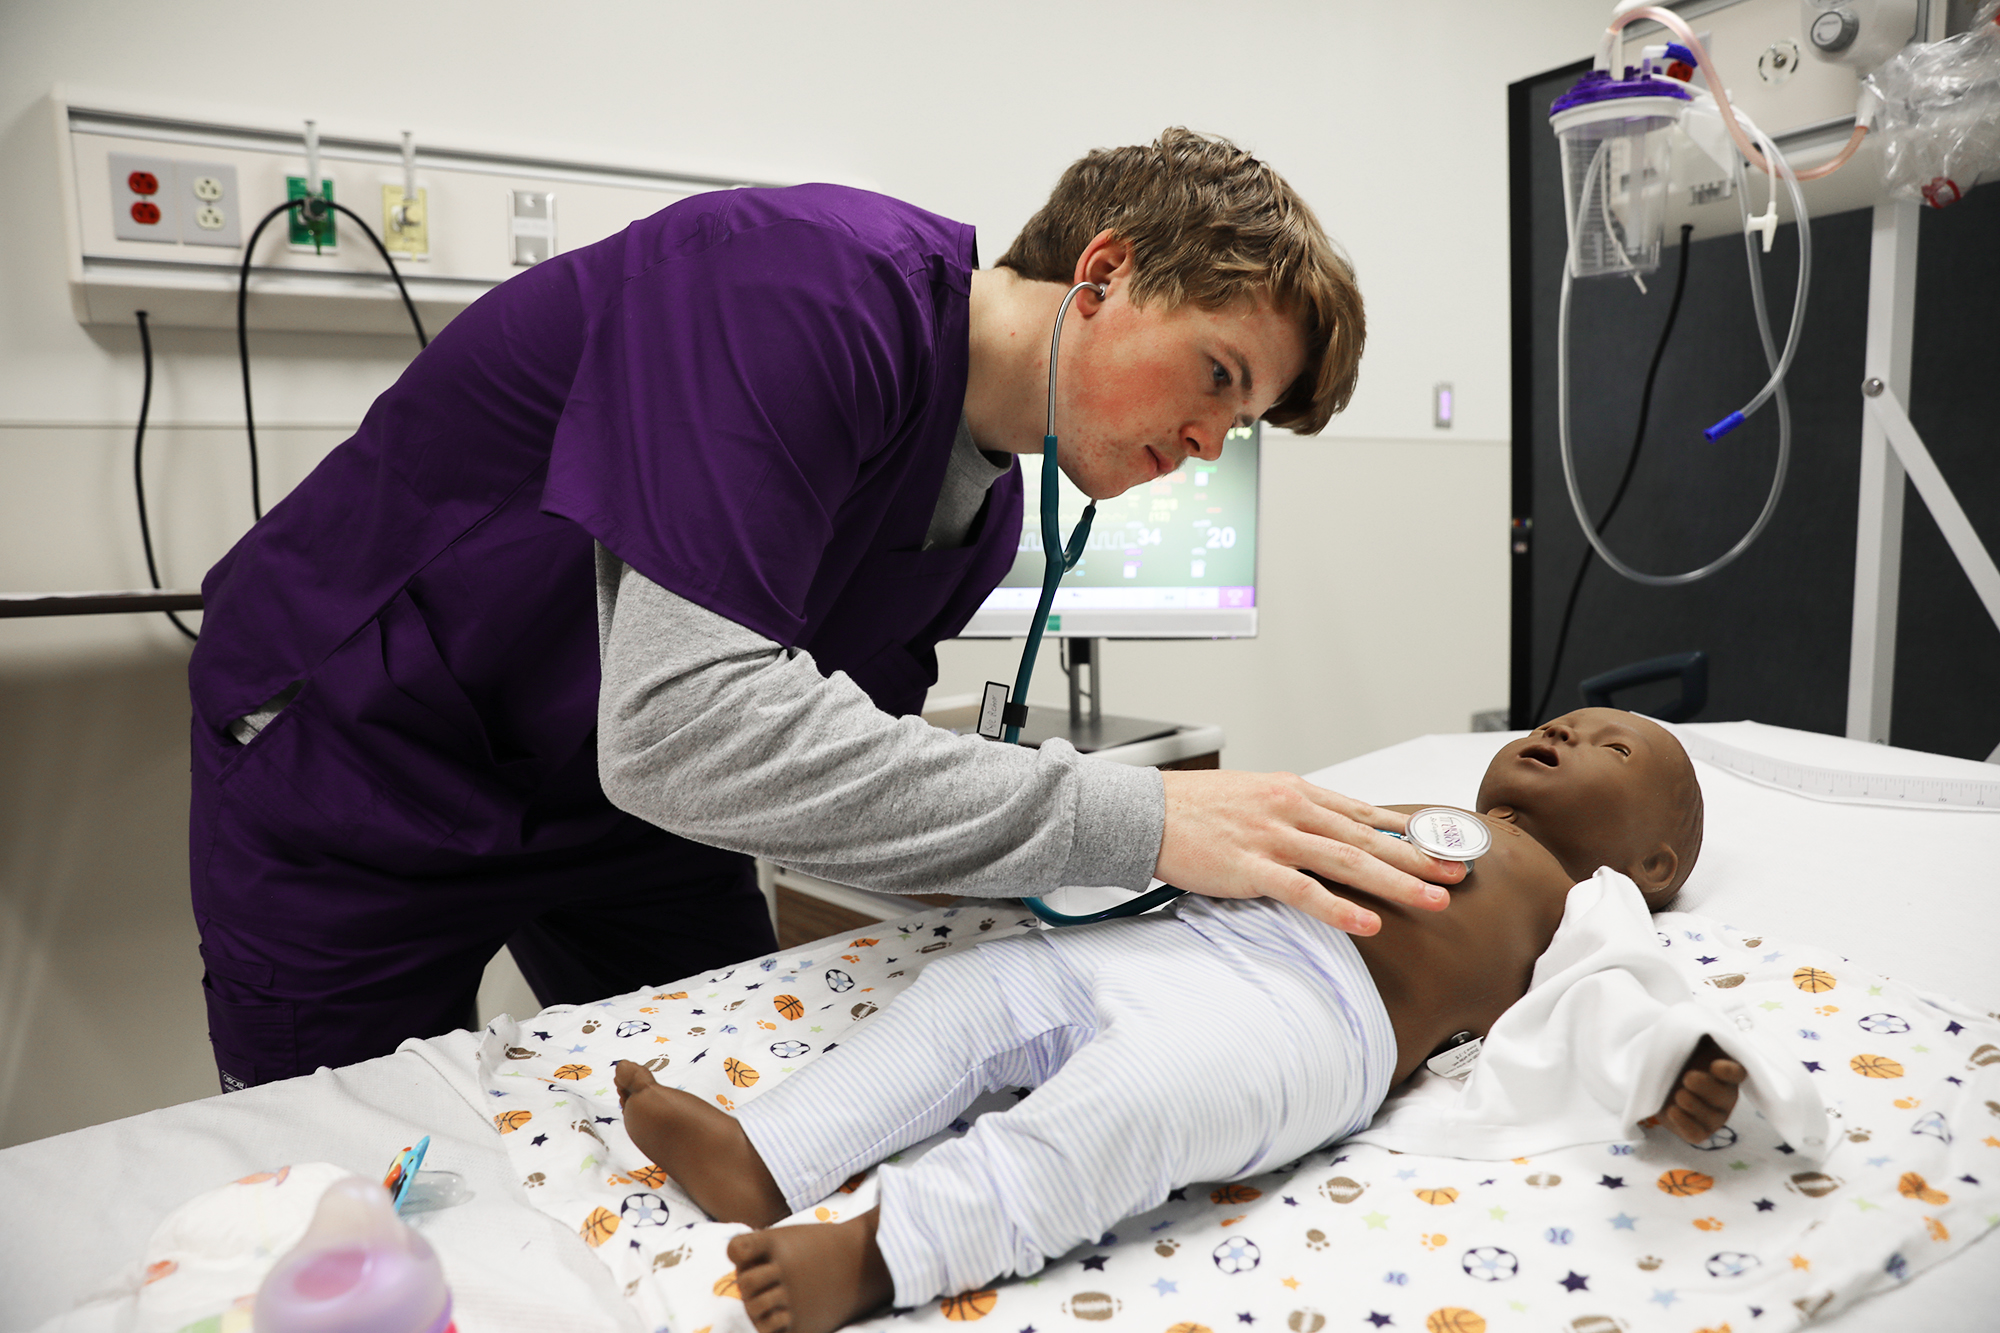 Mount Union student working in a nursing lab.